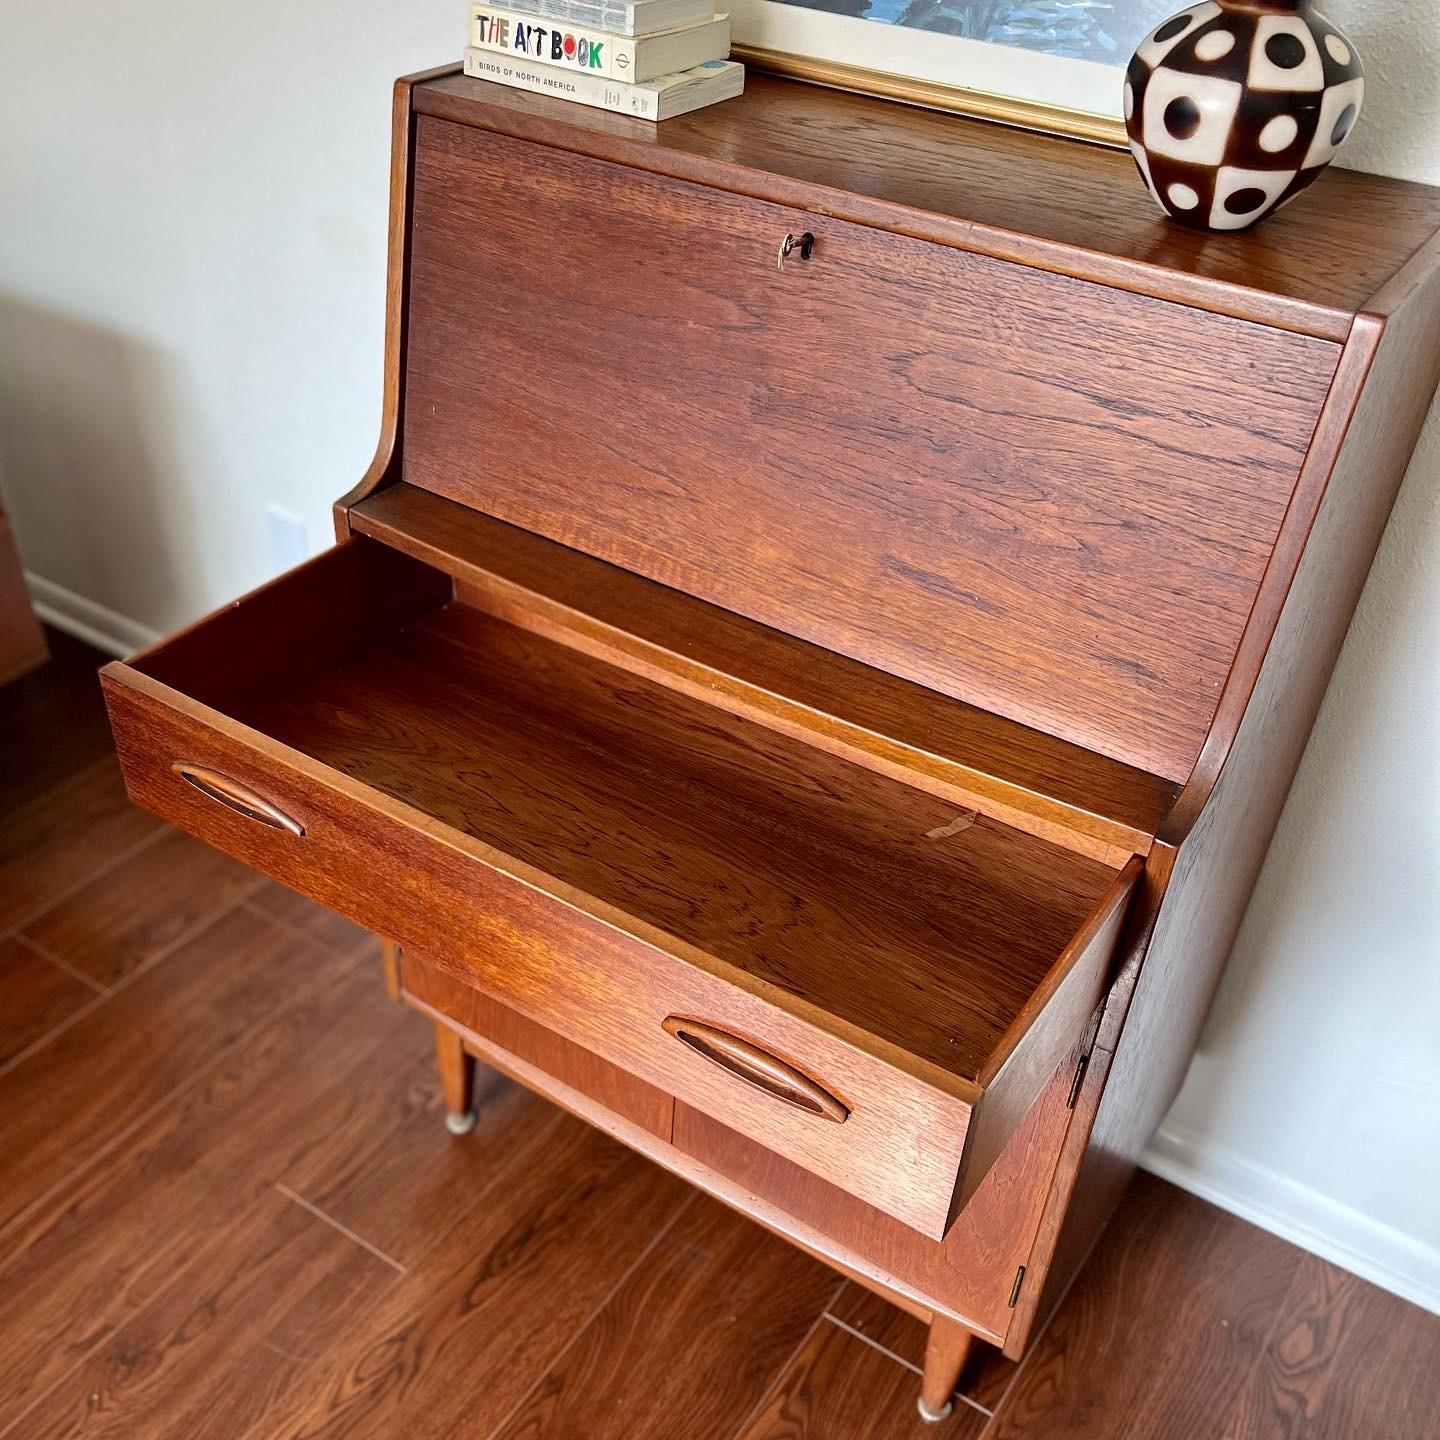 A lovely teak veneered sewing box from the 1960s, unmarked. The top extends with a fold out flap & there’s a pull out wicker basket underneath with a partitioned drawer above. In great original condition.

Dimensions:
25